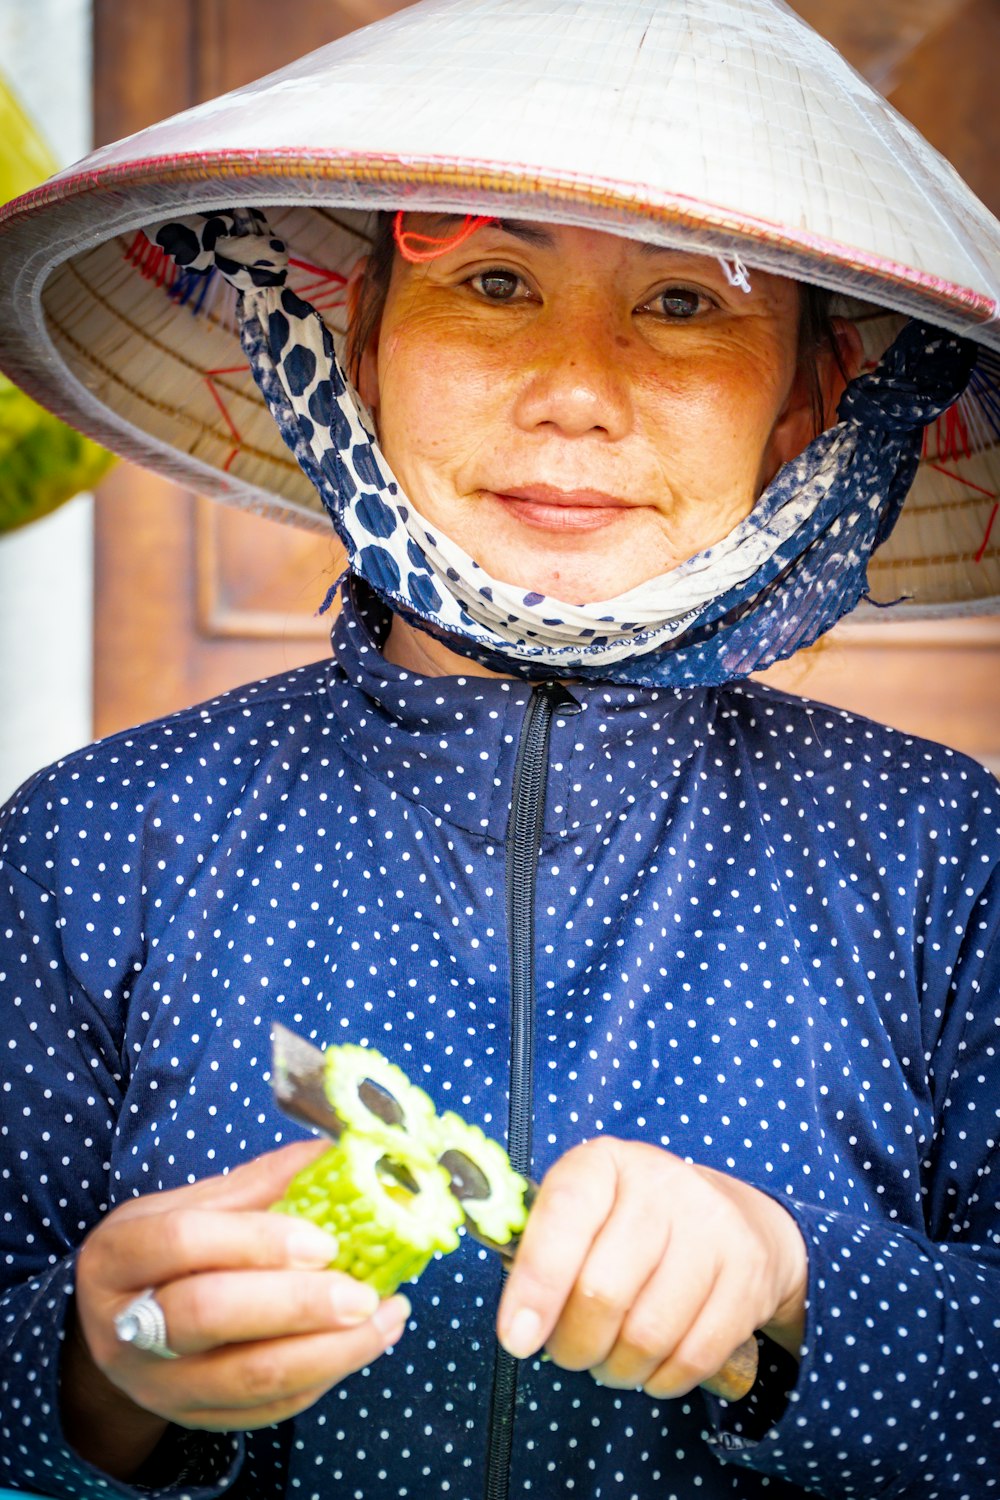 woman in white hat and blue top slicing vegetable